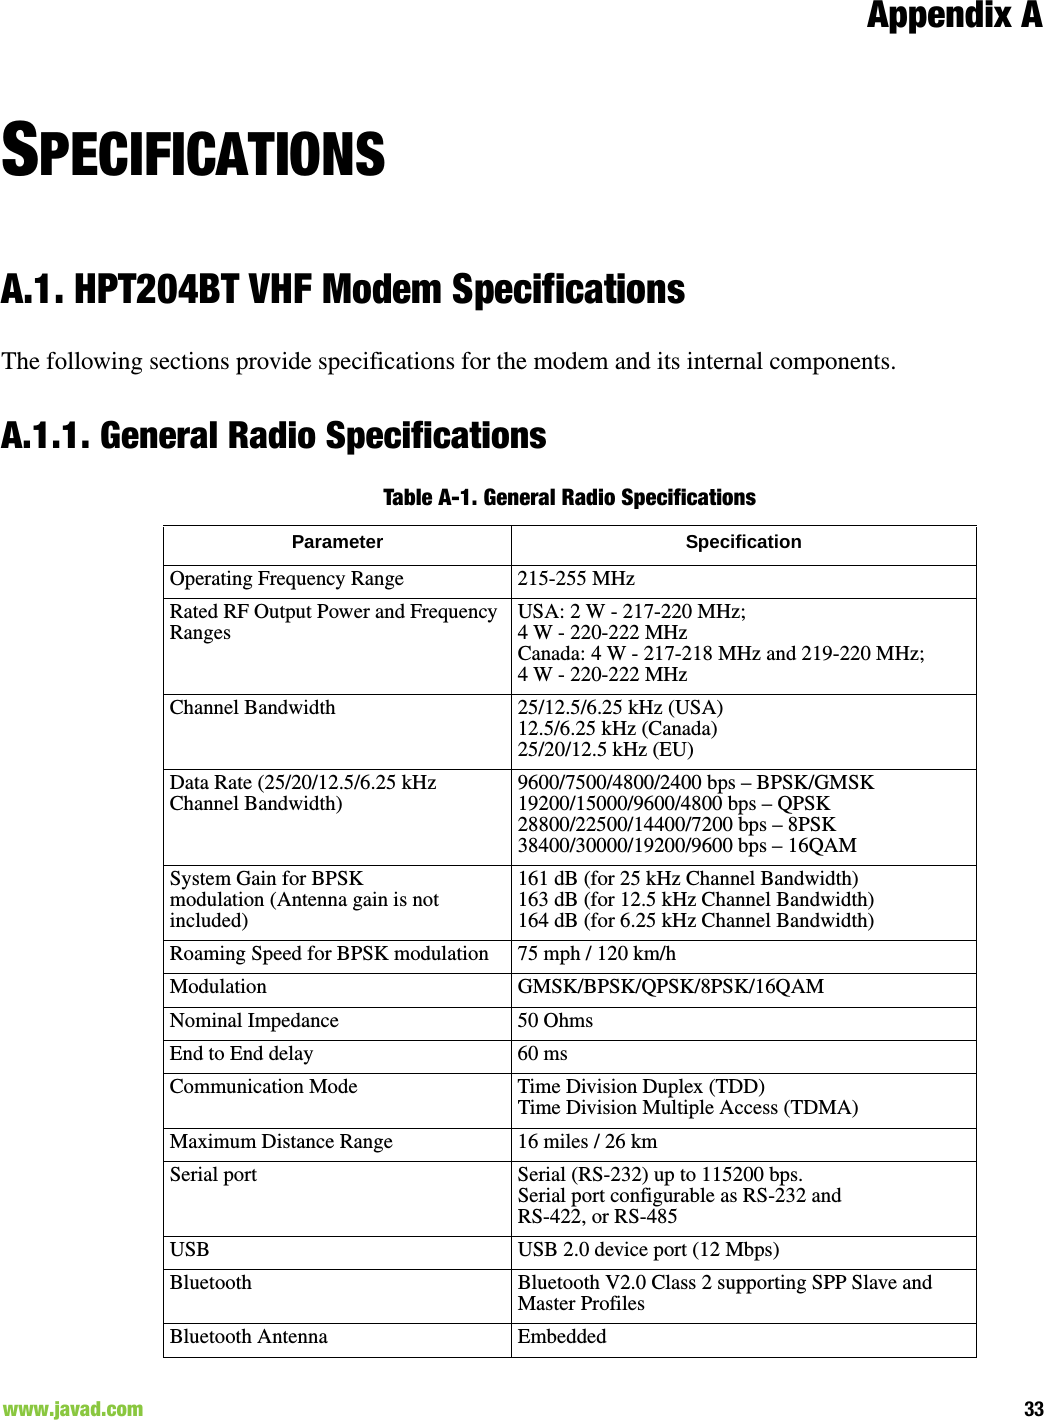 Appendix A33www.javad.com                                                                                                                                              SPECIFICATIONSA.1. HPT204BT VHF Modem SpecificationsThe following sections provide specifications for the modem and its internal components.A.1.1. General Radio SpecificationsTable A-1. General Radio Specifications Parameter SpecificationOperating Frequency Range 215-255 MHzRated RF Output Power and Frequency RangesUSA: 2 W - 217-220 MHz; 4 W - 220-222 MHzCanada: 4 W - 217-218 MHz and 219-220 MHz;4 W - 220-222 MHzChannel Bandwidth 25/12.5/6.25 kHz (USA)12.5/6.25 kHz (Canada)25/20/12.5 kHz (EU)Data Rate (25/20/12.5/6.25 kHz Channel Bandwidth)9600/7500/4800/2400 bps – BPSK/GMSK19200/15000/9600/4800 bps – QPSK28800/22500/14400/7200 bps – 8PSK38400/30000/19200/9600 bps – 16QAMSystem Gain for BPSKmodulation (Antenna gain is notincluded)161 dB (for 25 kHz Channel Bandwidth)163 dB (for 12.5 kHz Channel Bandwidth)164 dB (for 6.25 kHz Channel Bandwidth)Roaming Speed for BPSK modulation 75 mph / 120 km/hModulation GMSK/BPSK/QPSK/8PSK/16QAM Nominal Impedance 50 OhmsEnd to End delay 60 msCommunication Mode Time Division Duplex (TDD)Time Division Multiple Access (TDMA)Maximum Distance Range 16 miles / 26 kmSerial port Serial (RS-232) up to 115200 bps.Serial port configurable as RS-232 and RS-422, or RS-485USB USB 2.0 device port (12 Mbps)Bluetooth Bluetooth V2.0 Class 2 supporting SPP Slave and Master ProfilesBluetooth Antenna Embedded